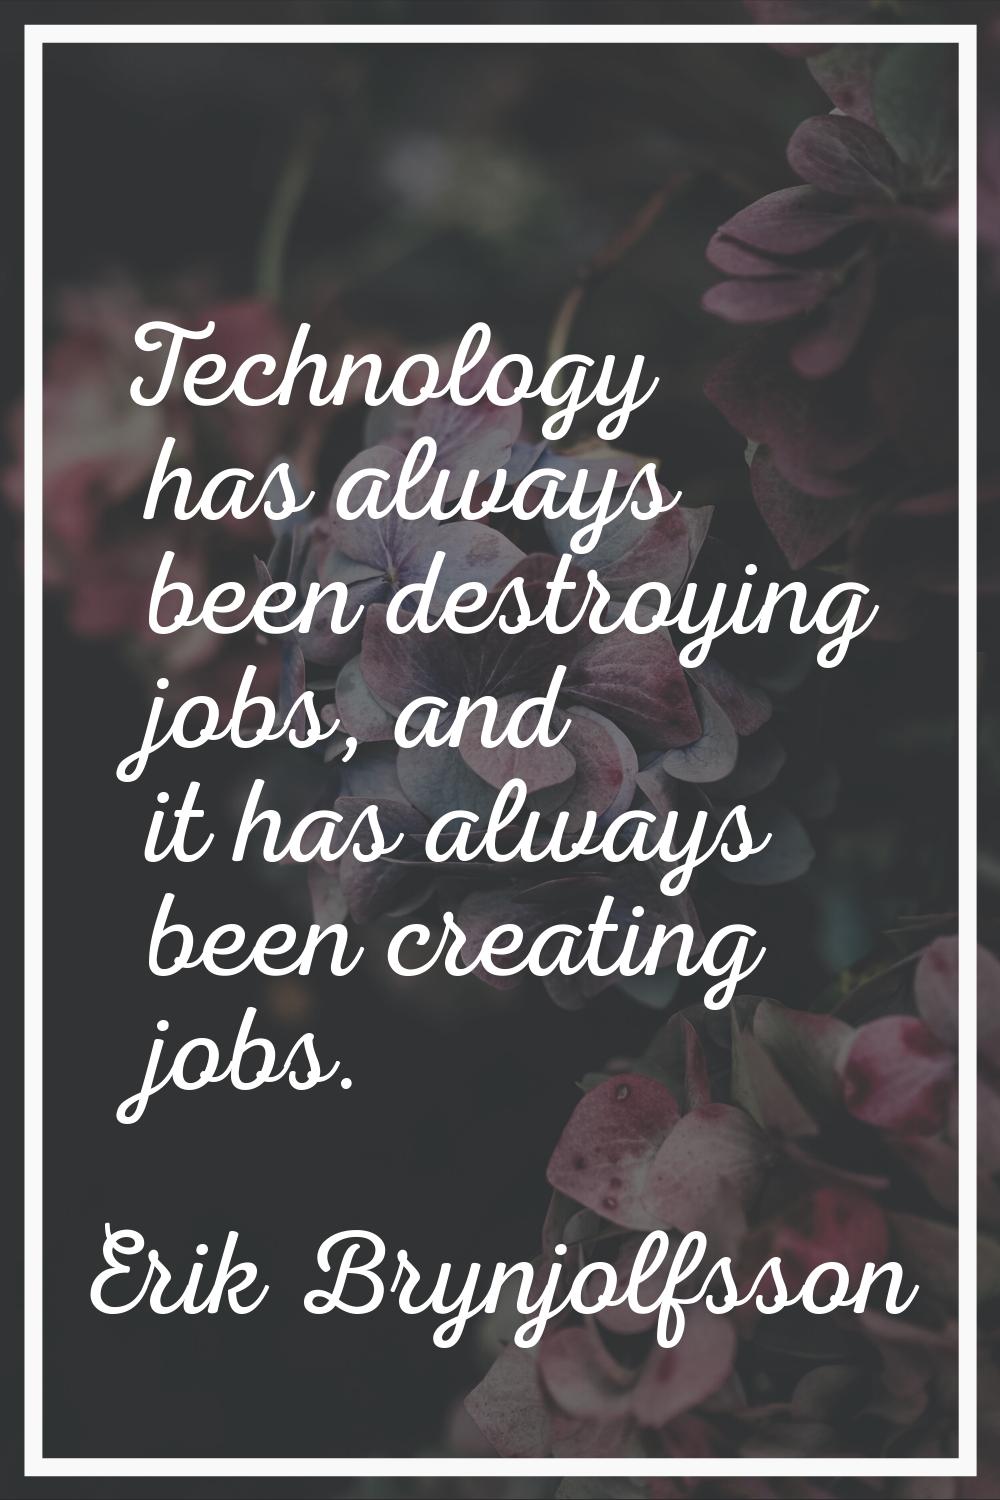 Technology has always been destroying jobs, and it has always been creating jobs.